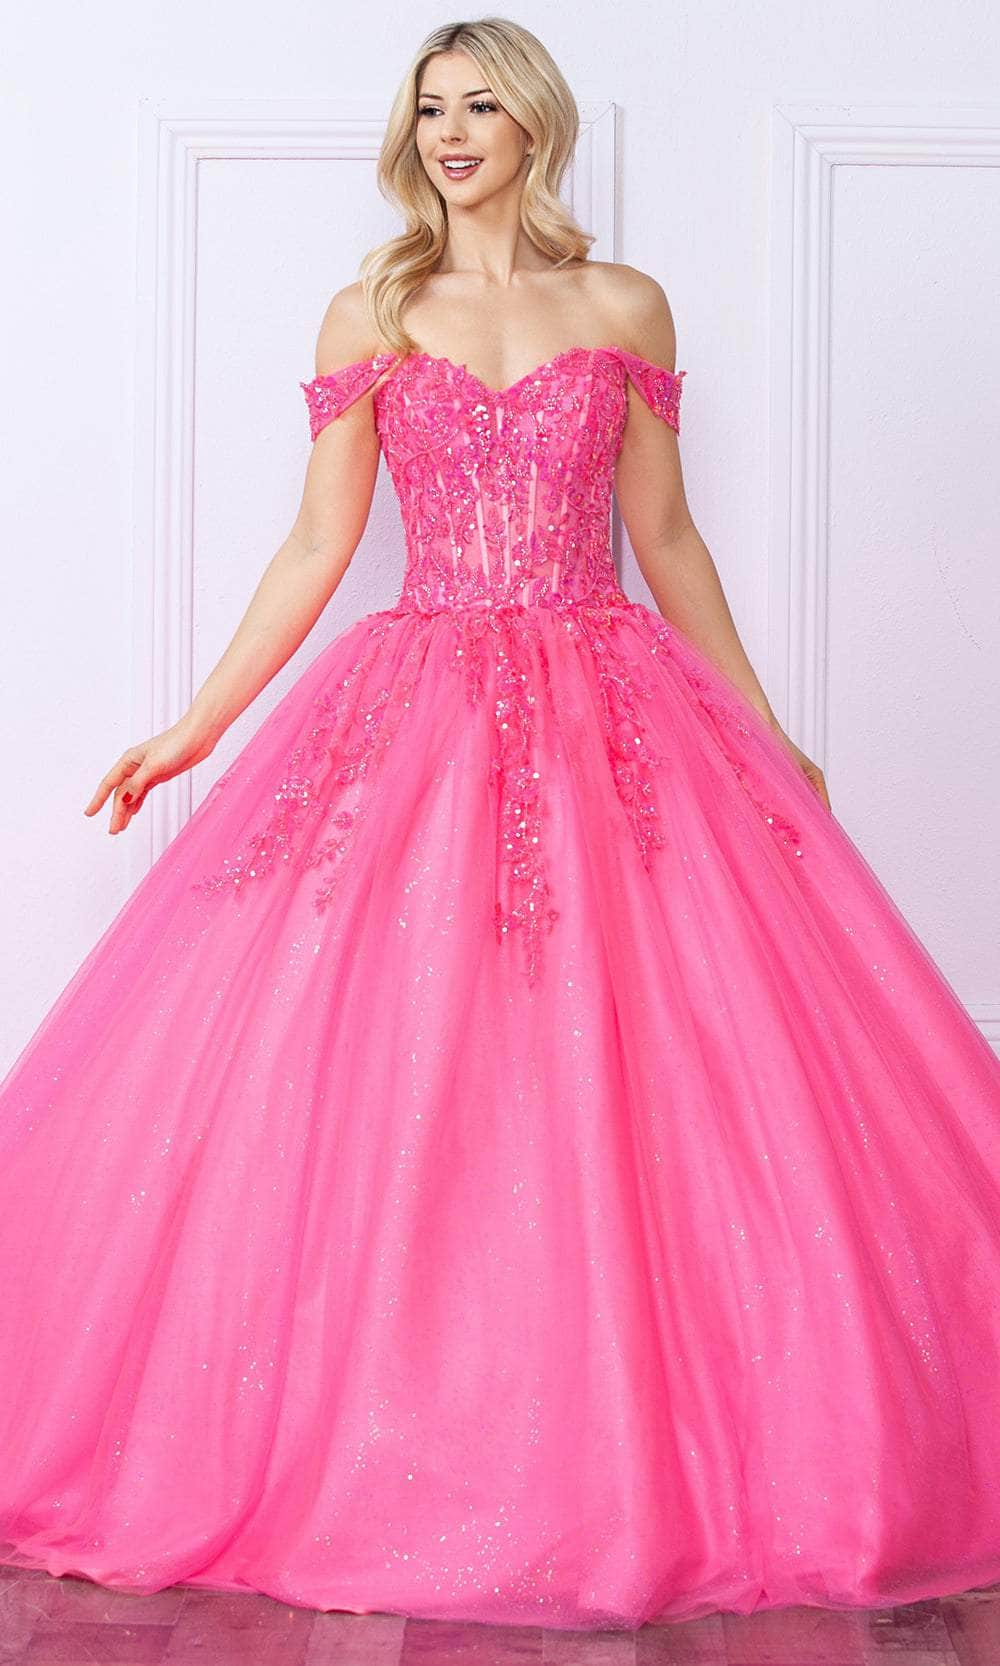 Nox Anabel H1349 - Beaded Corset Bodice Ballgown Ball Gowns 4 / Hot Pink